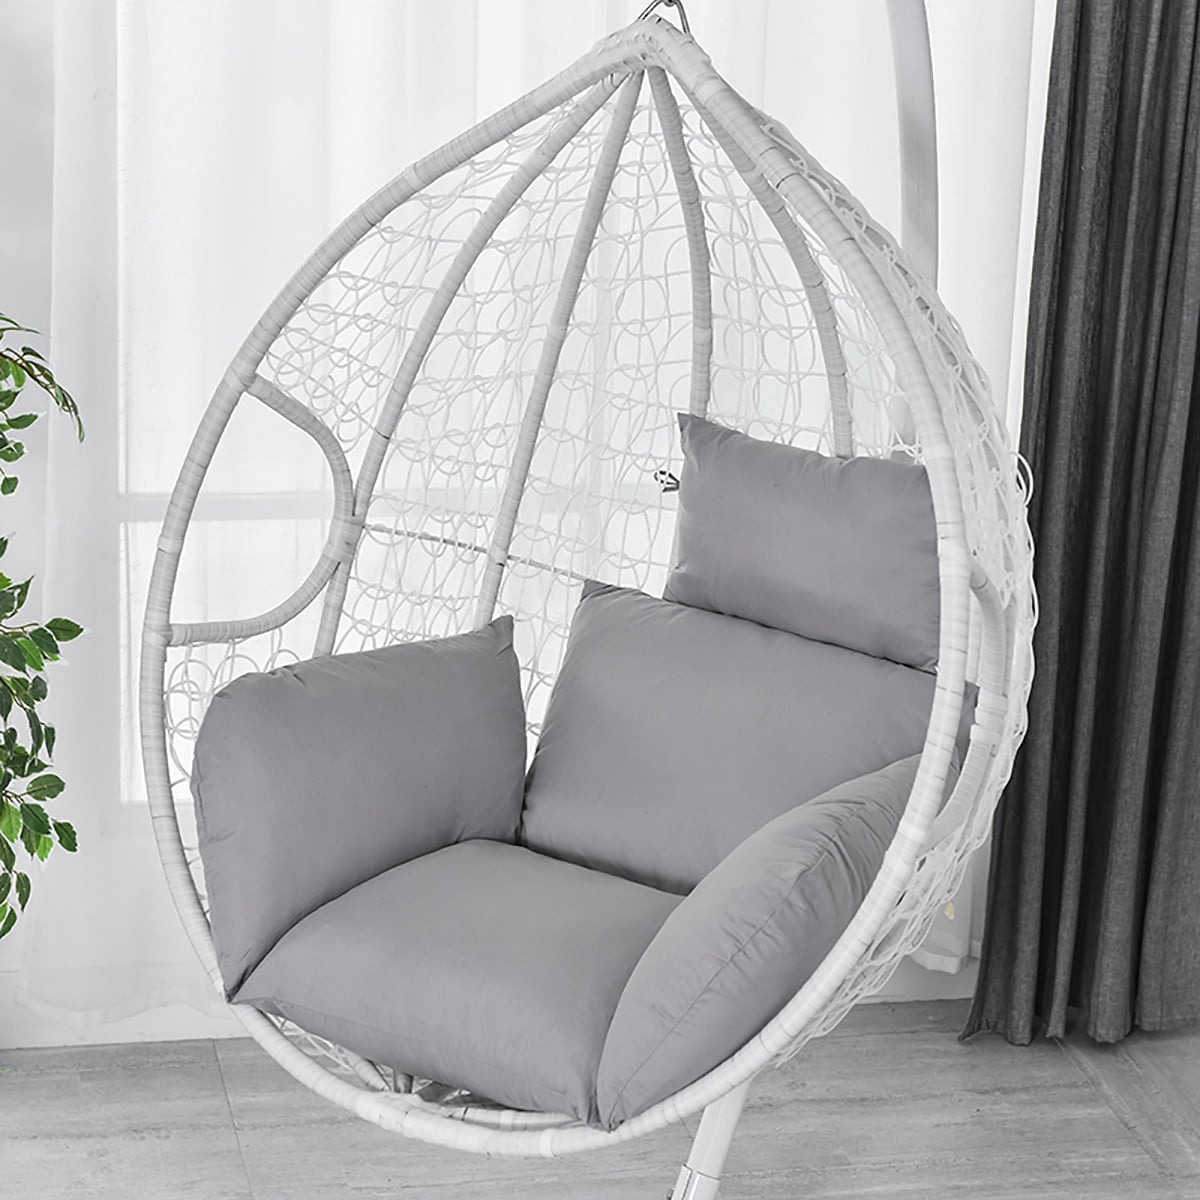 PP&DD Hanging Cushion,Egg Hammock Chair Pads,Swing Seat Cushion,Large Size Thick Nest Hanging Chair Back Without Stand 41inch A D105cm 